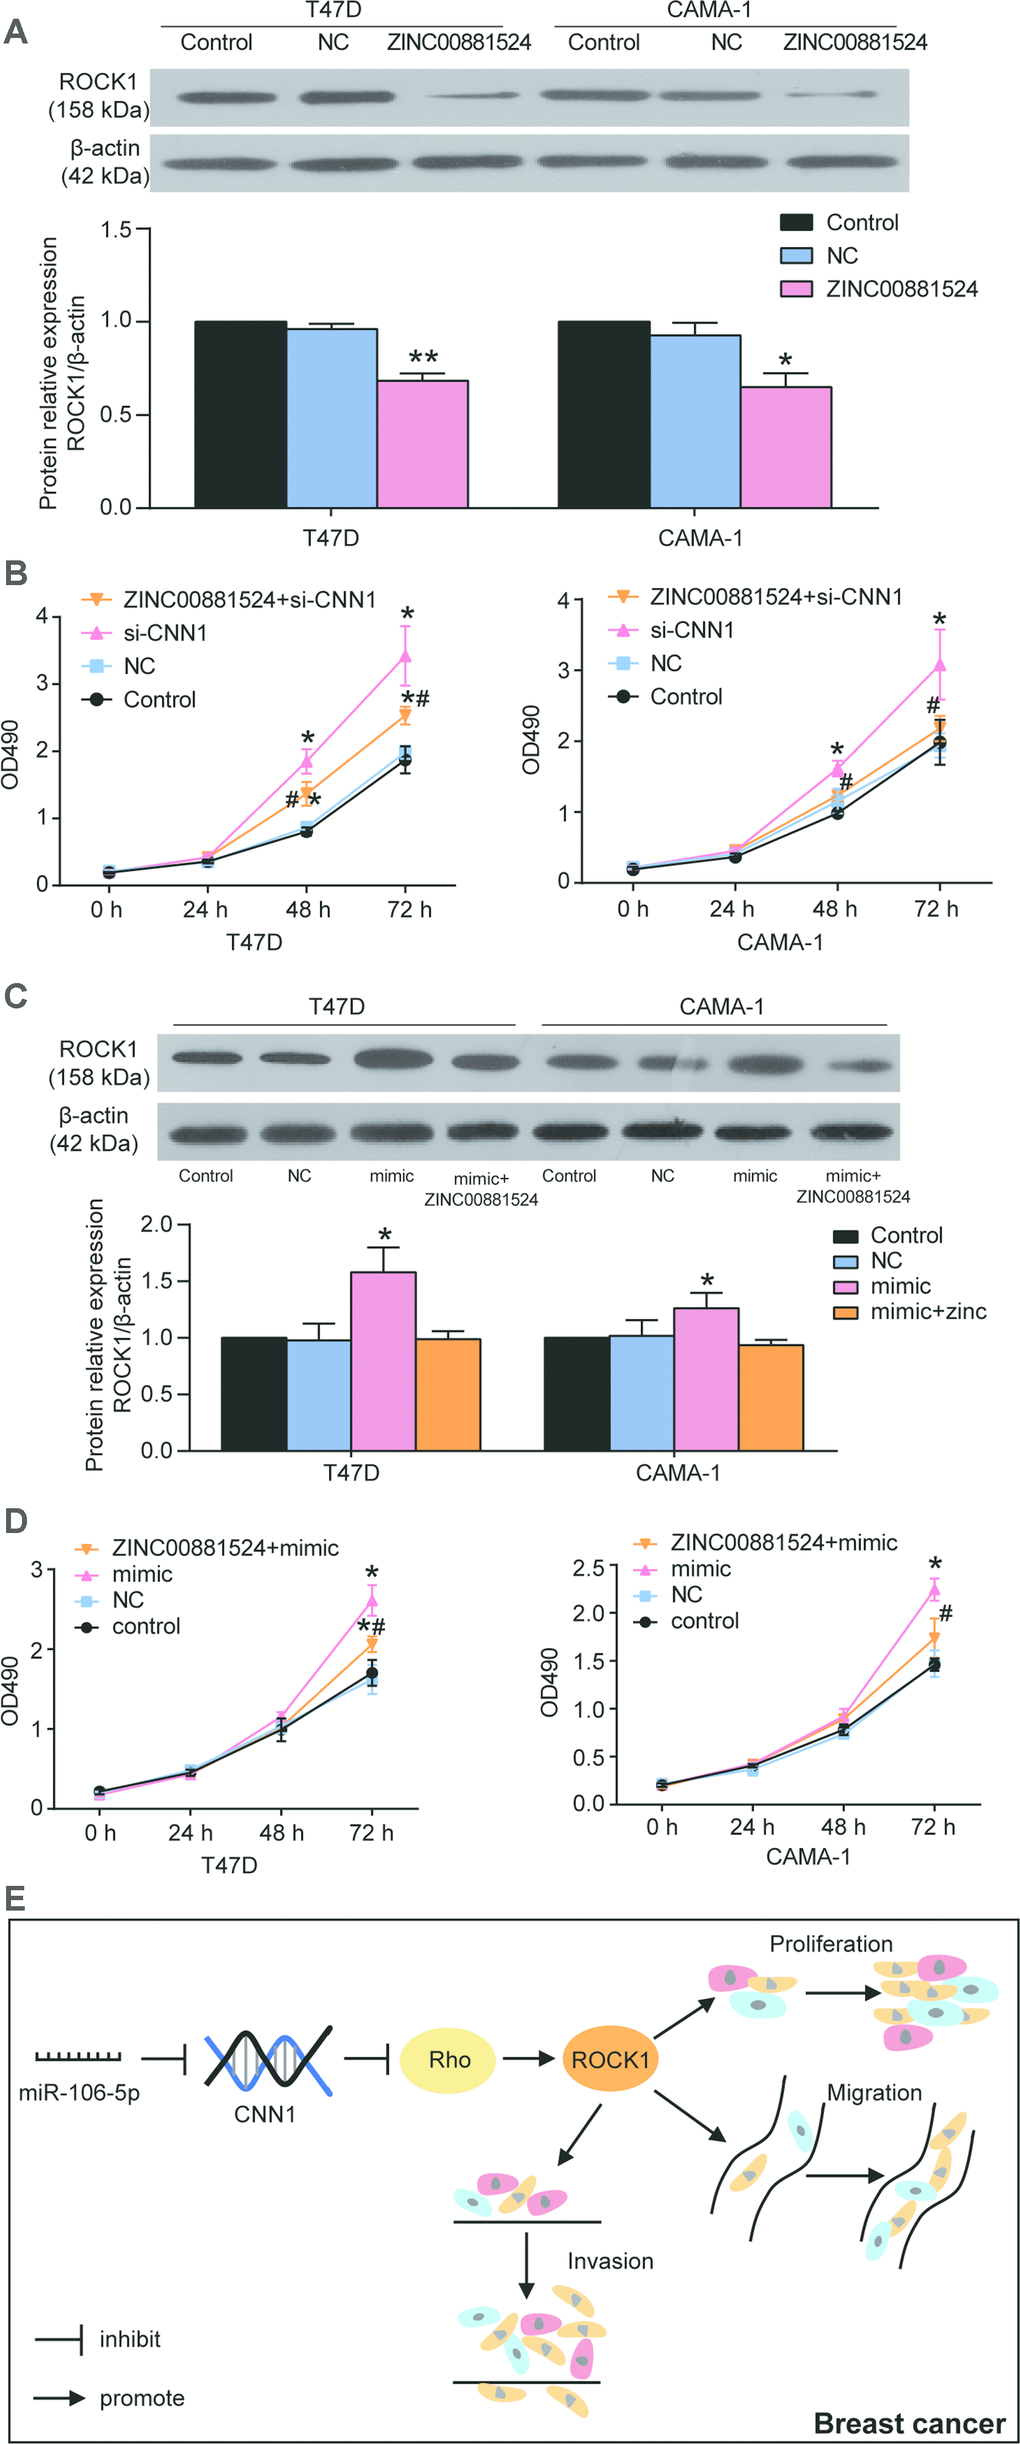 miR-106b-5p promoted the cell proliferation in T47D and CAMA-1 cells by targeting CNN1 and activating the Rho/ROCK1 signaling pathway. (A) The ZINC00881524 was successfully inhibited the protein expression of ROCK1 after the cells were treated with ZINC00881524 for 24 h. ZINC00881524 is the inhibitor of the Rho/ROCK1 pathway. The protein expression of ROCK1 was detected by immunoblotting assay. (B) The CCK8 assay demonstrated that Rho/ROCK1 inhibitor alleviated the cell proliferation compared with the treatment of CNN1 siRNA. si-CNN1, the cells were transfected with CNN1 siRNA. ZINC00881524+si-CNN1, the cells were co-transfected with ZINC00881524 and CNN1 siRNA. *PC) The protein expression of ROCK1 was upregulated by transfection of miR-106b-5p mimic, but co-transfection of miR-106b-5p and ZINC00881524 could downregulate it. mimic, the cells were transfected with miR-106b-5p mimic. mimic+ ZINC00881524, the cells were co-transfected with miR-106b-5p mimic and ZINC00881524. *PD) Co-transfection of miR-106b-5p and ZINC00881524 alleviated the positive effect of miR-106b-5p mimic on cell proliferation in T47D and CAMA-1 cells. mimic, the cells were transfected with miR-106b-5p mimic. mimic+ ZINC00881524, the cells were co-transfected with miR-106b-5p mimic and ZINC00881524. *PE) The signaling cascade indicated that miR-106b-5p promoted breast cancer by targeting CNN1 and activating the Rho/ROCK1 signaling pathway.